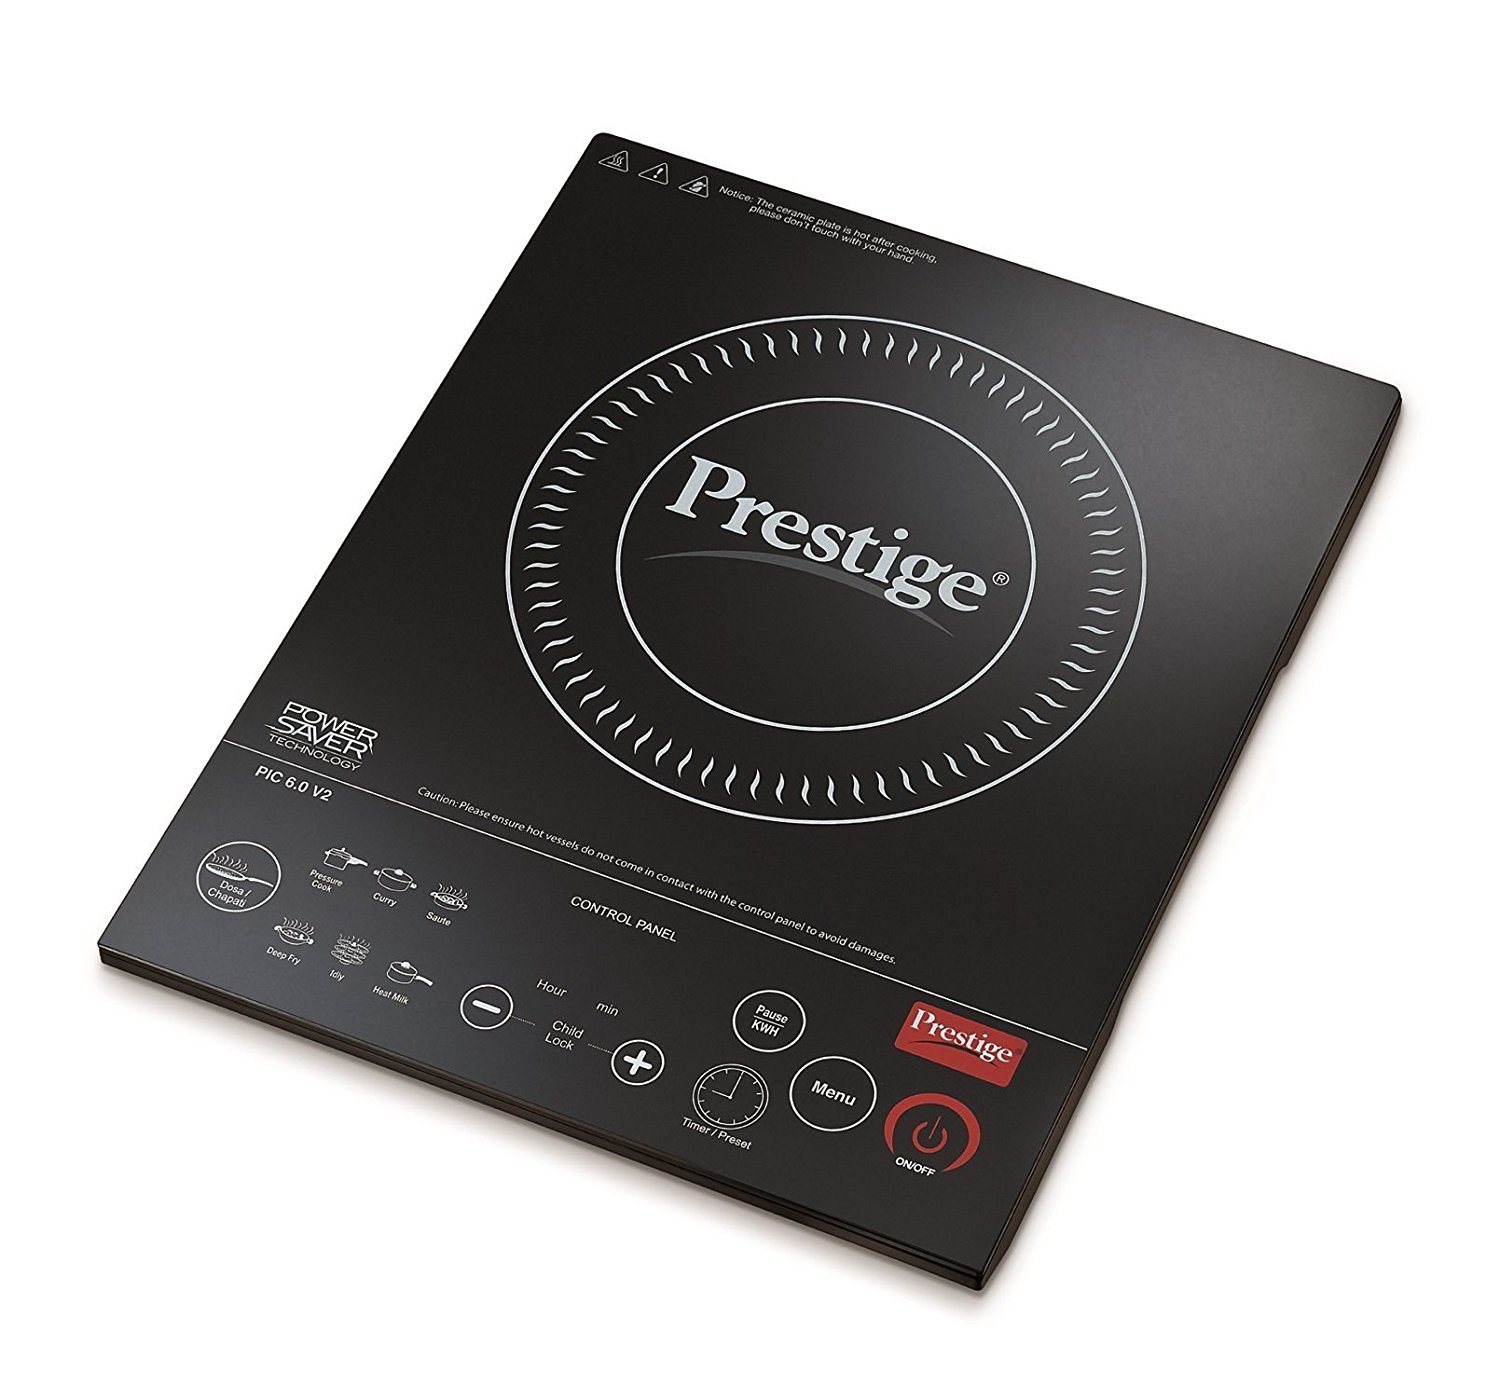 induction stove